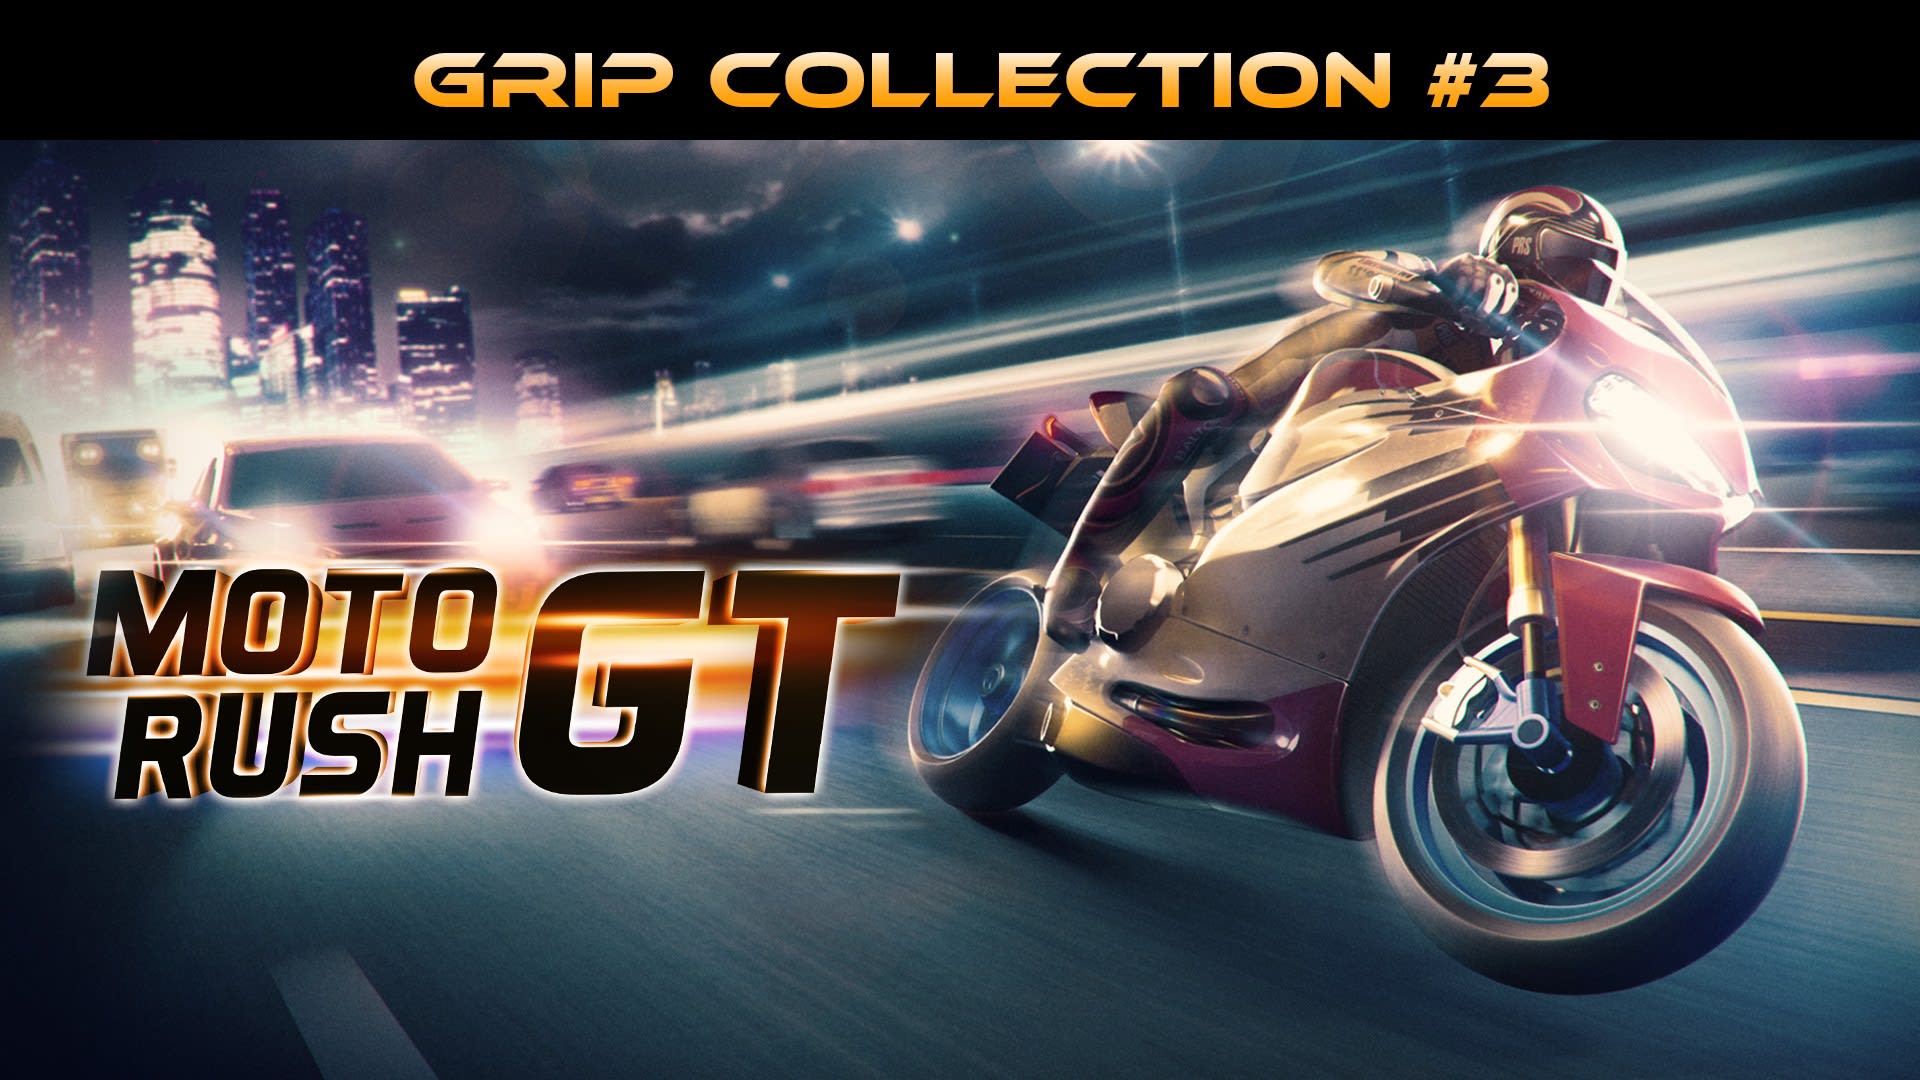 Moto Rush GT Grip Collection #3